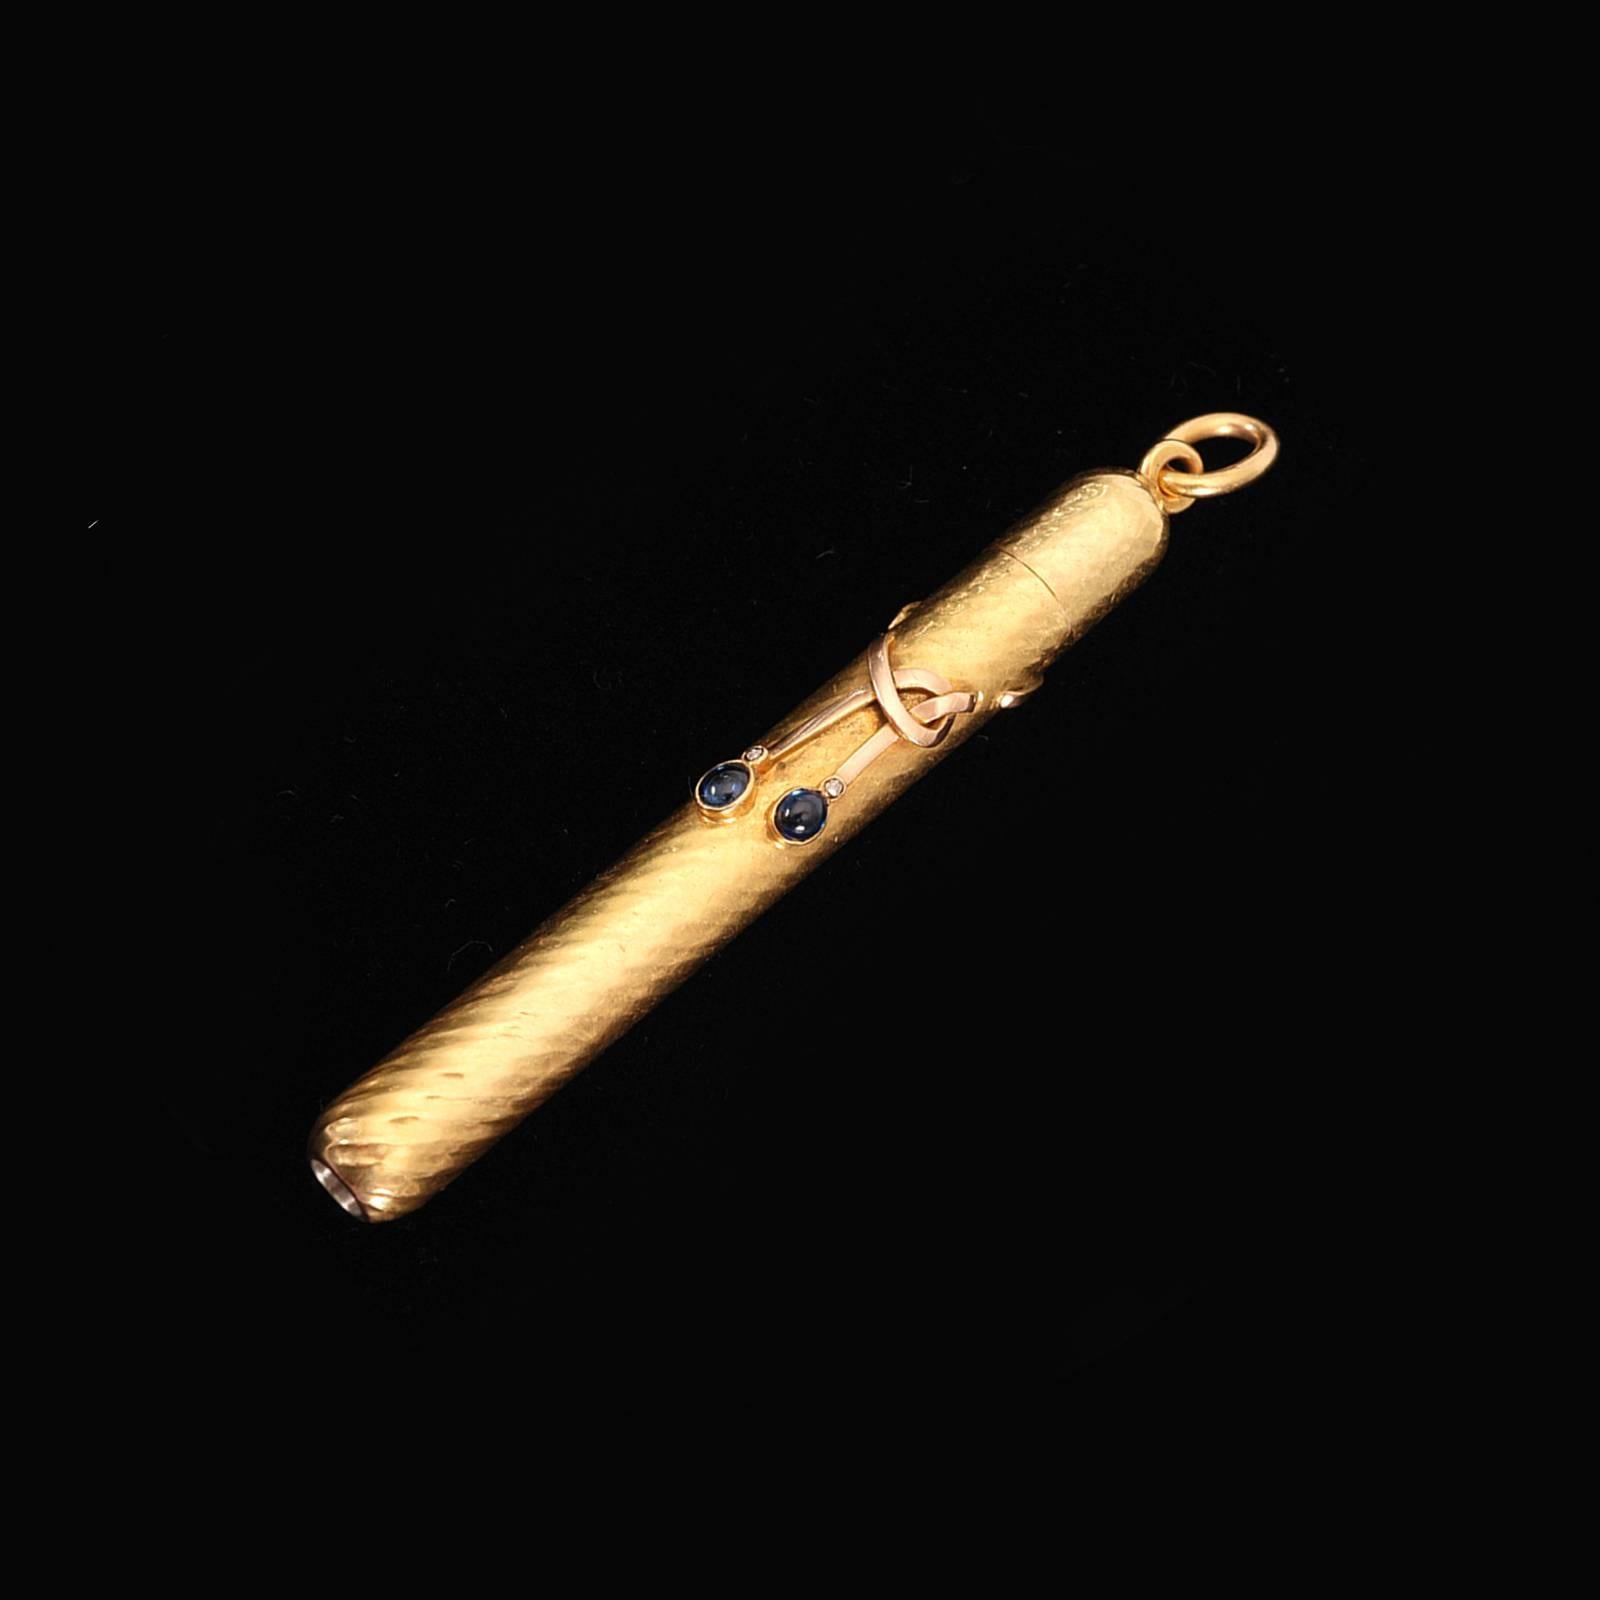 A Russian jeweled two-color gold retractable pencil by Nicholls and Plincke, Saint Petersburg, before 1880. The heavy gold pencil of cylindrical form with spiral fluting, having diamonds and cabochon sapphires suspended from it with rose gold